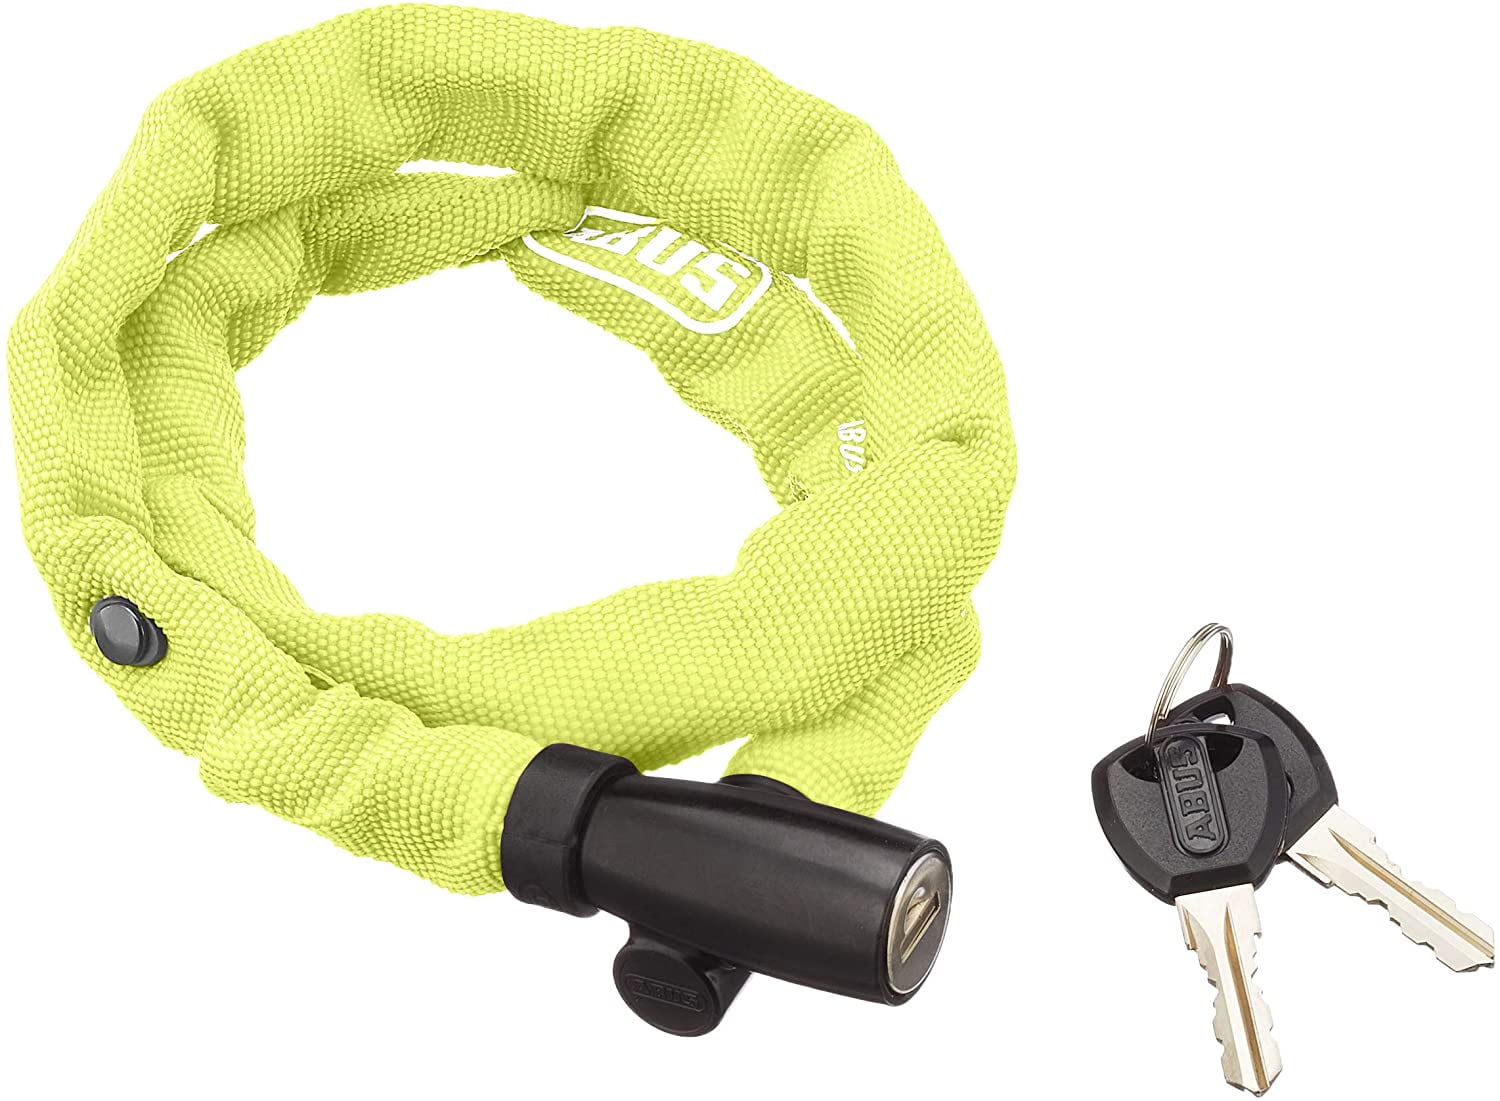 Abus Chain 1500 Web Lime, 60cm, SUPPLEMENTAL PROTECTION – The Web 1500 is the ideal chain lock for supplemental security. Perfect go through your.., By Visit the ABUS Store - Walmart.com